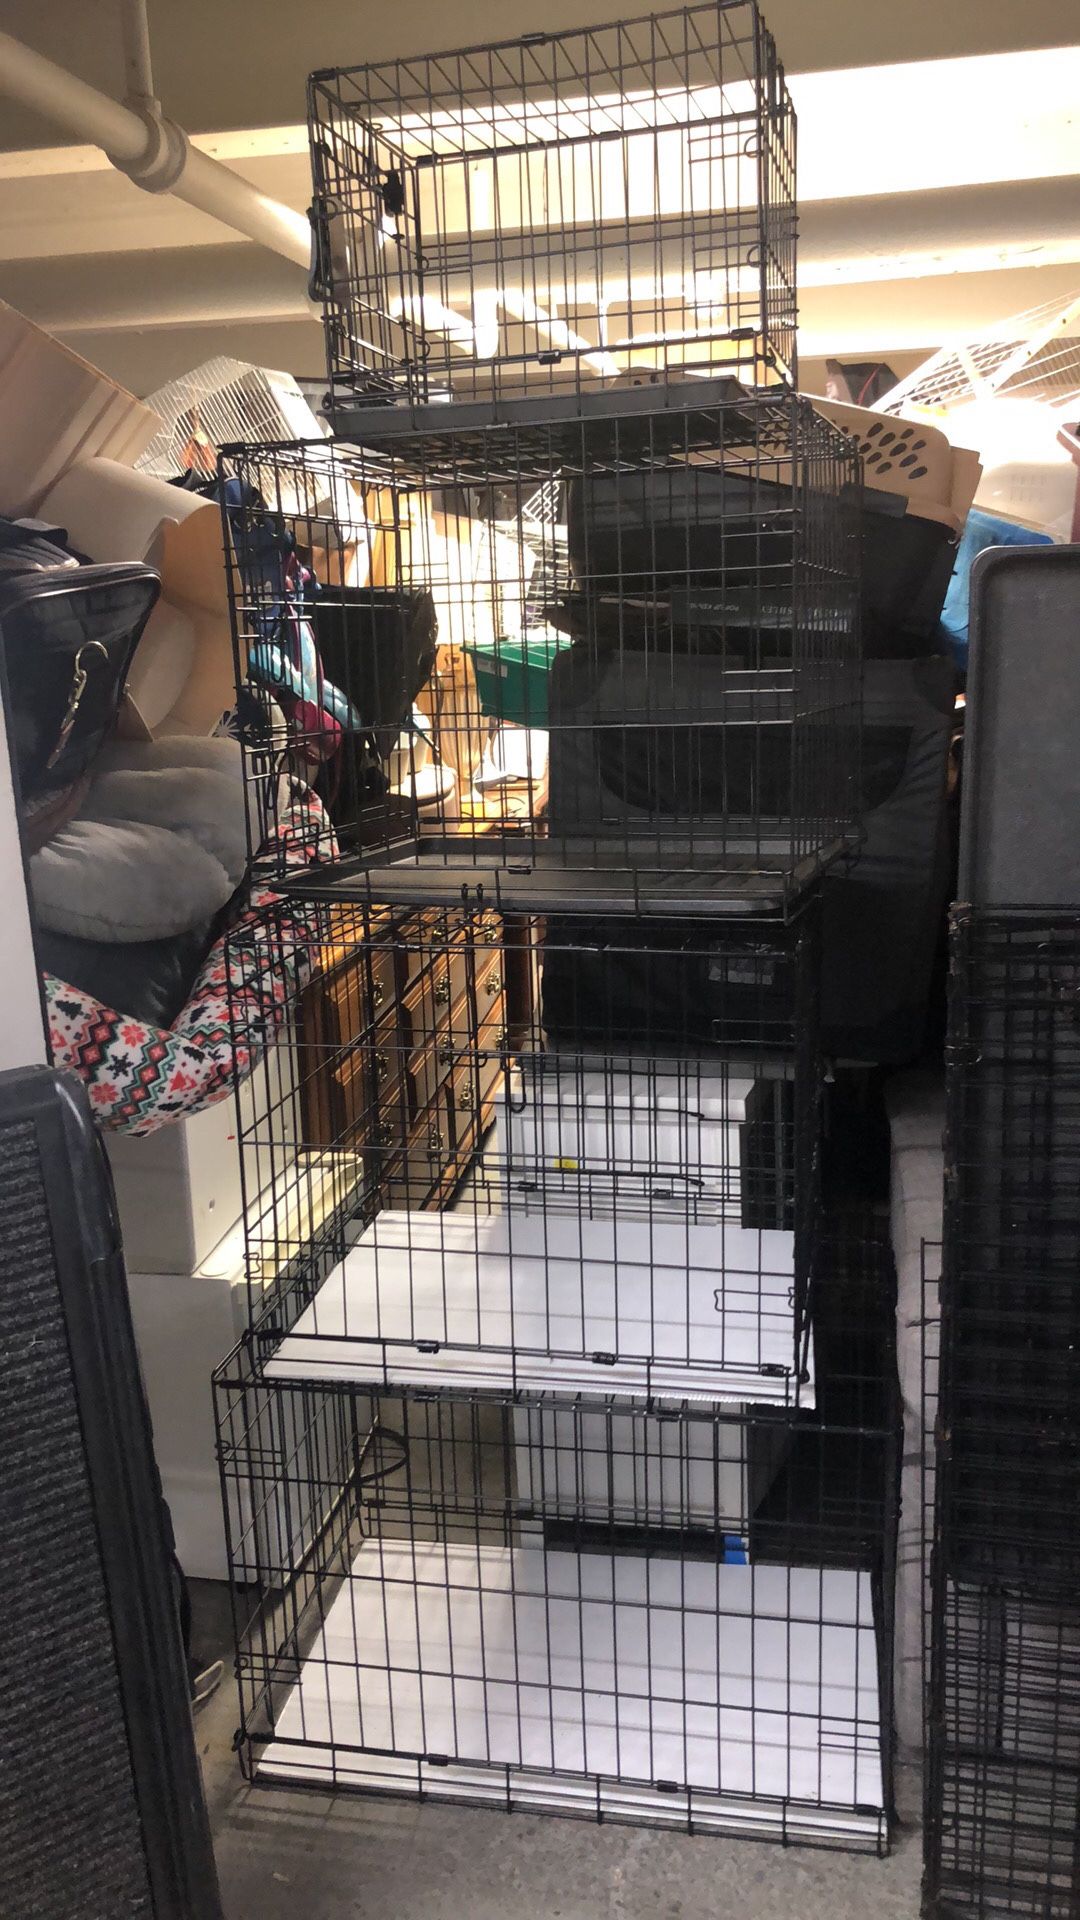 Small medium large extra large XX large dog cages the price by size and condition